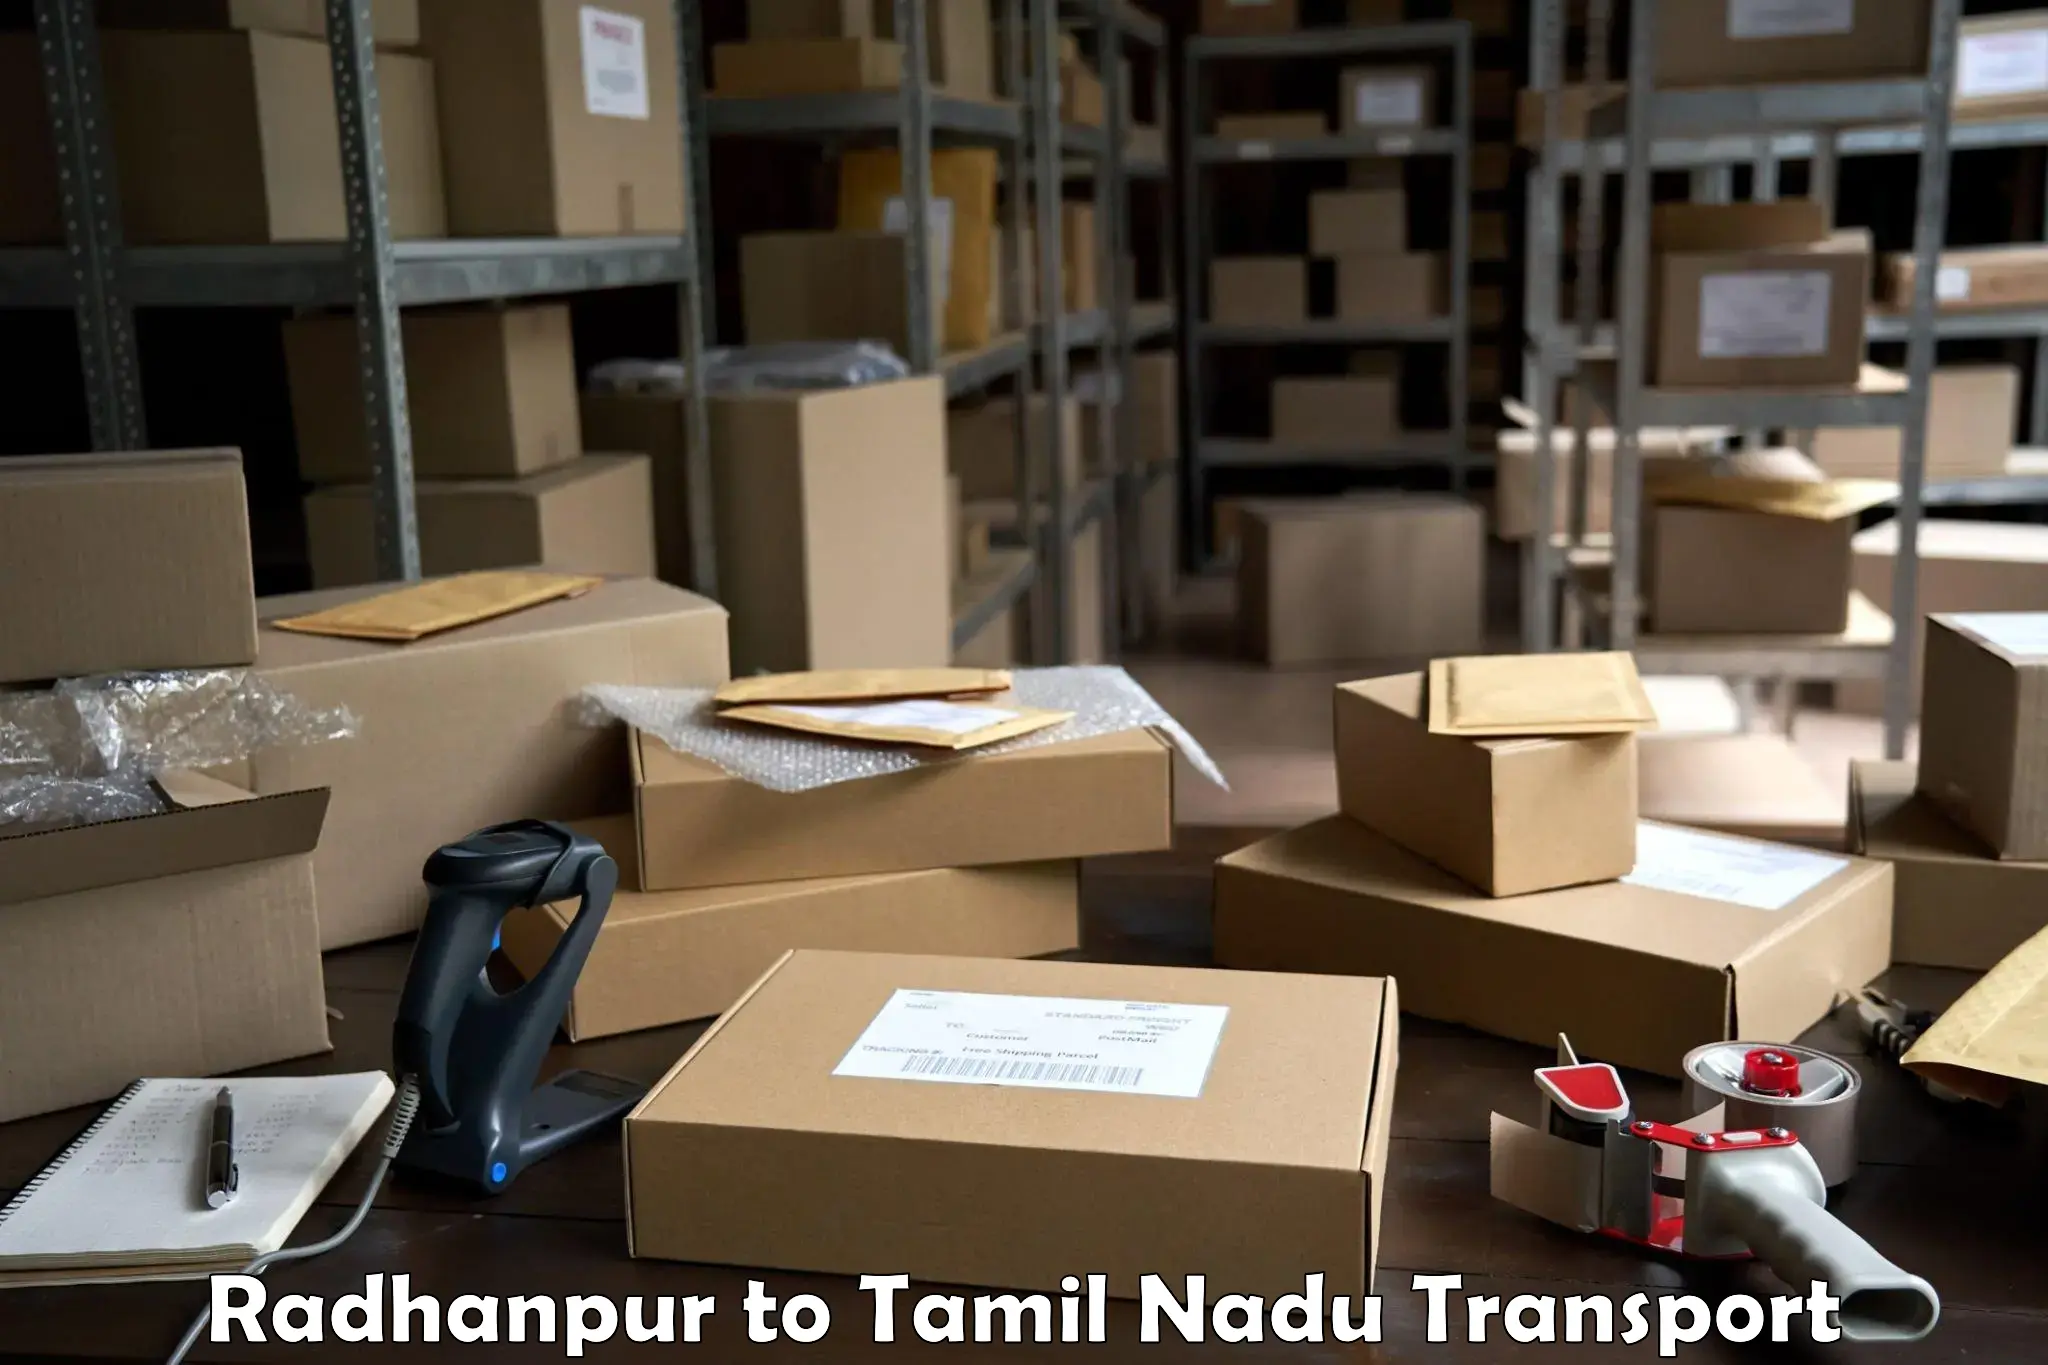 Commercial transport service Radhanpur to Chennai Port